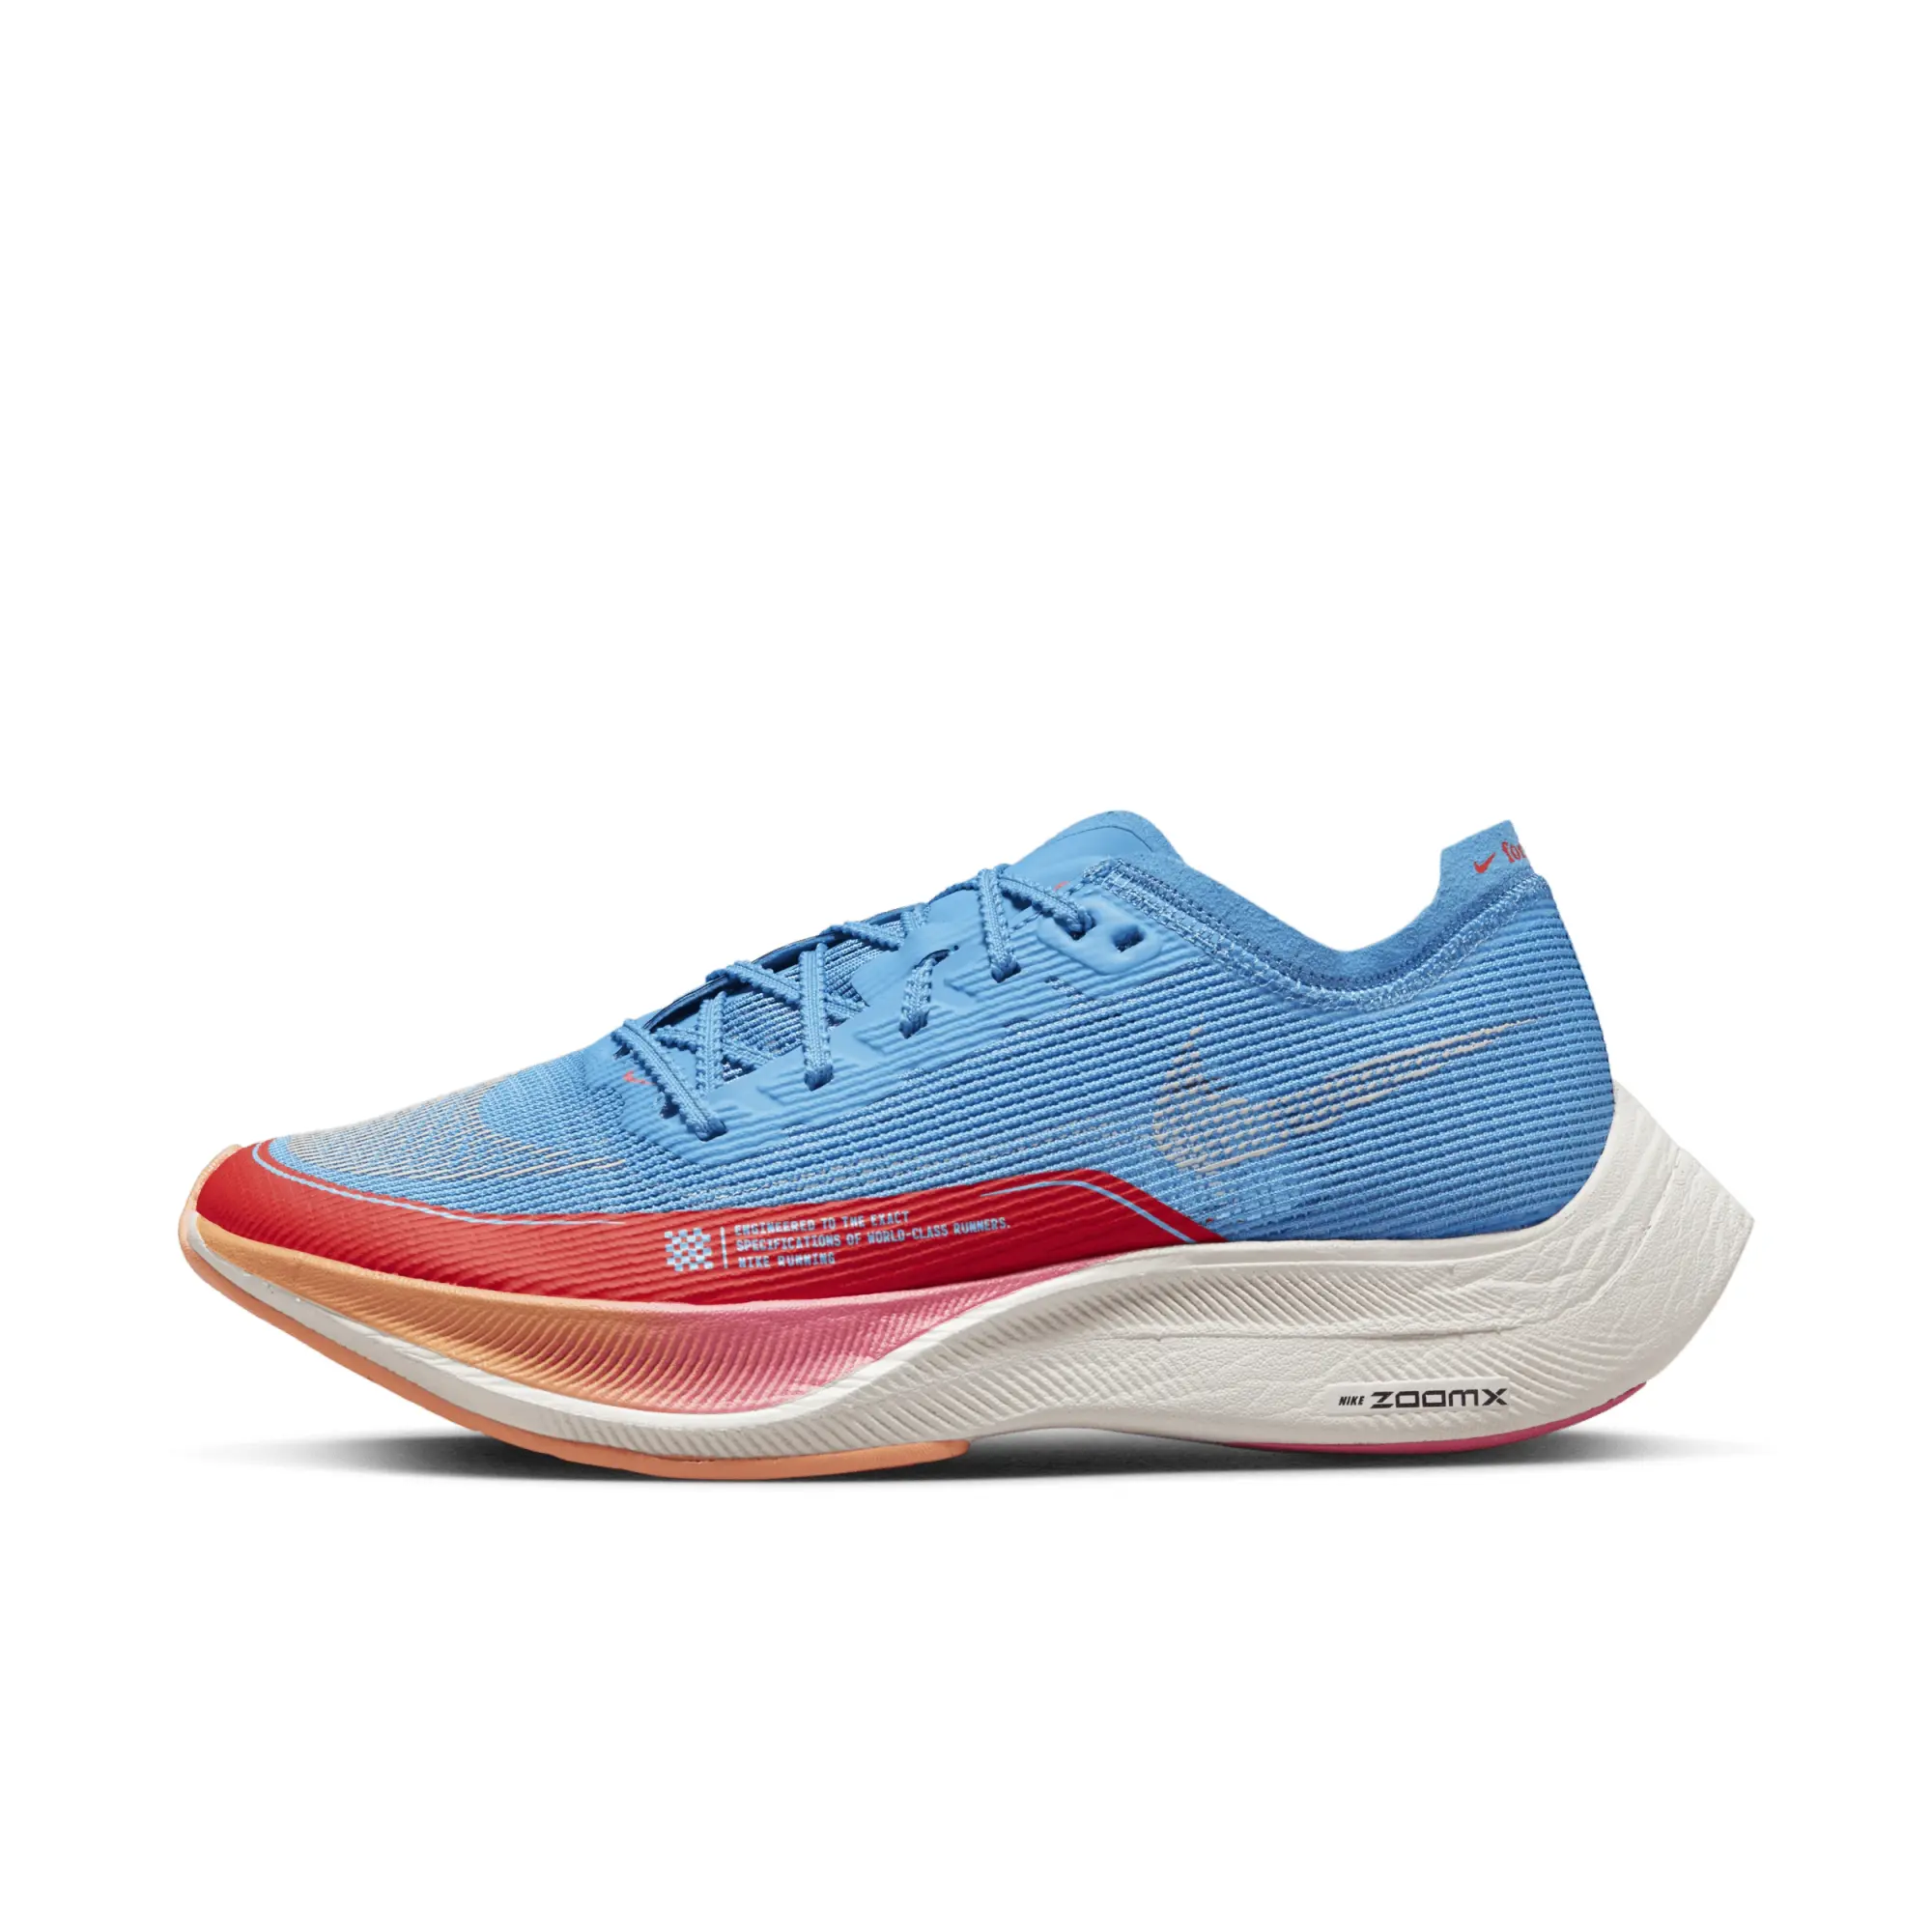 Nike Womens ZoomX Vaporfly Next% 2 For Future Me Shoes